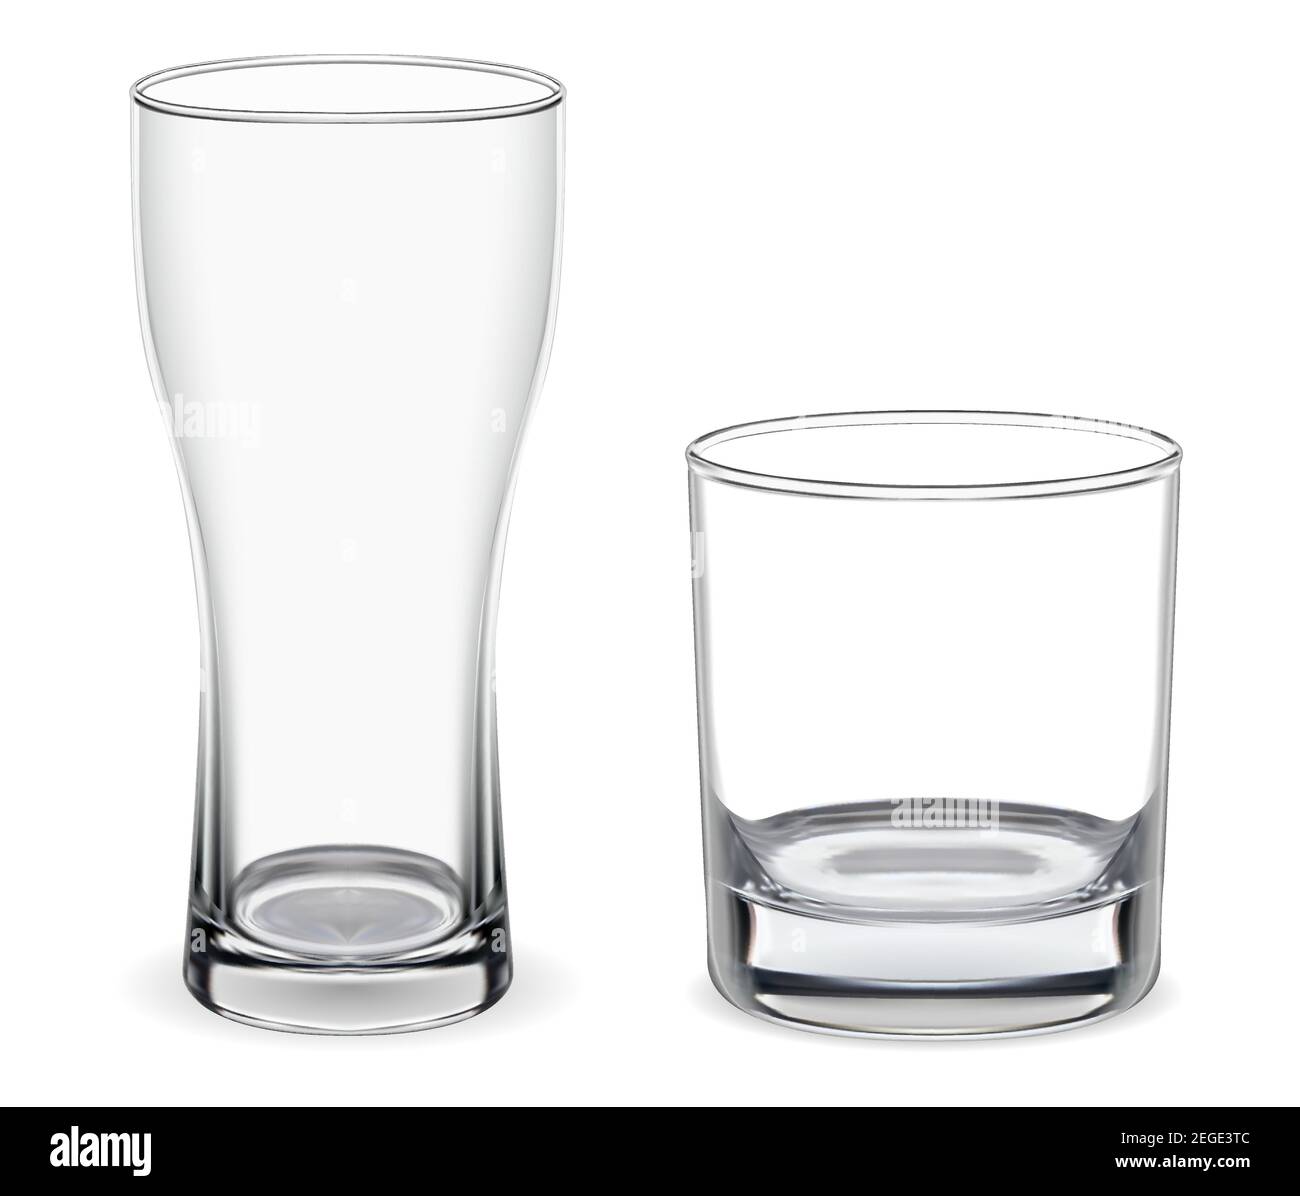 Glass Cups Empty Transparent Glasses And Goblet Mockups Realistic